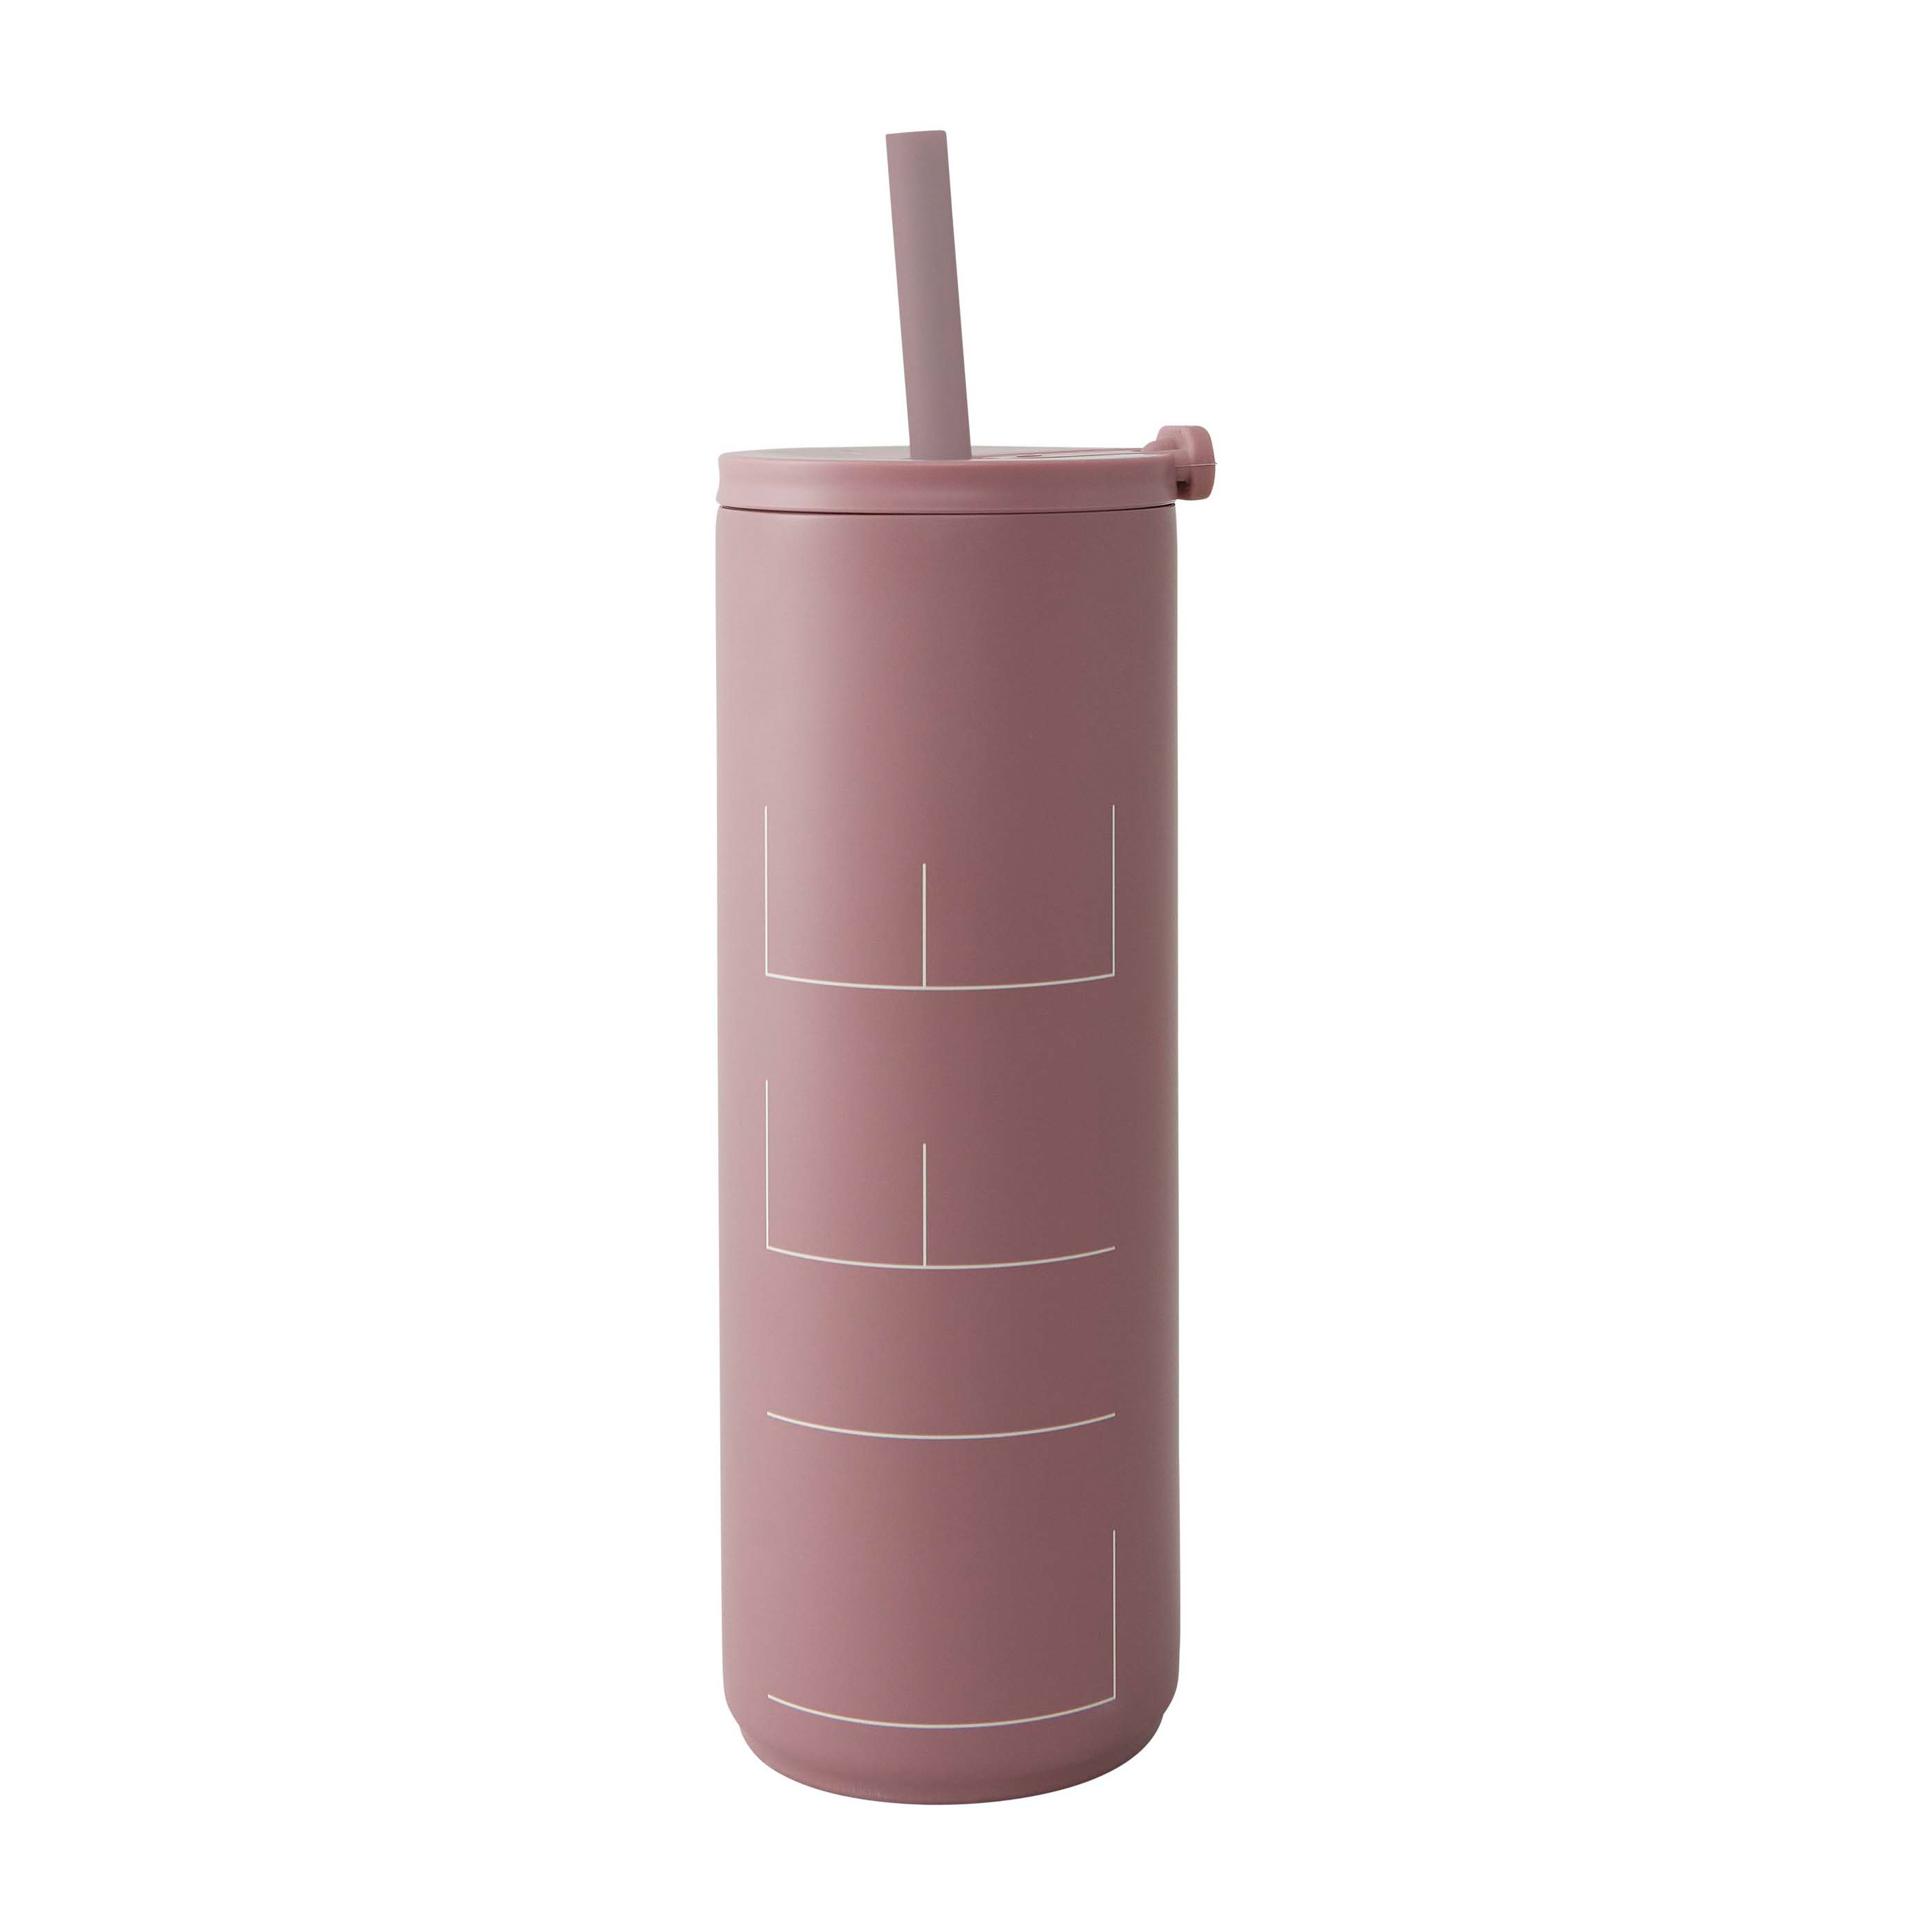 https://www.nordicnest.com/assets/blobs/design-letters-travel-life-thermos-with-straw-50-cl-ash-rose/514077-01_1_ProductImageMain-c773d76637.jpeg